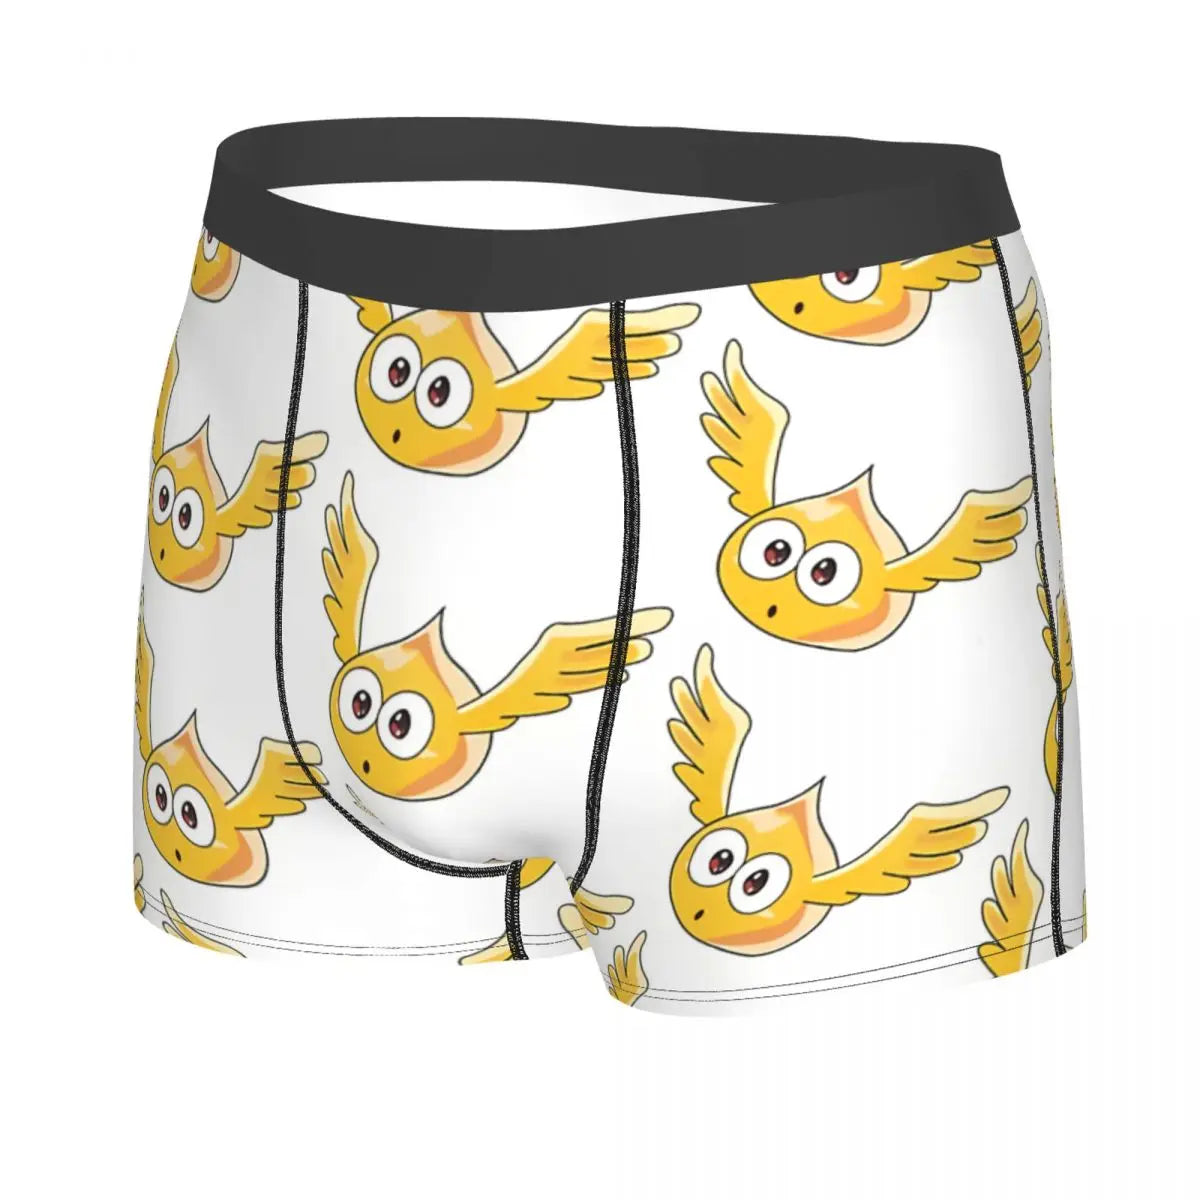 Golden Monster Men Boxer Briefs Dragon Quest Game Highly Breathable Underwear Top Quality Print Shorts Gift Idea